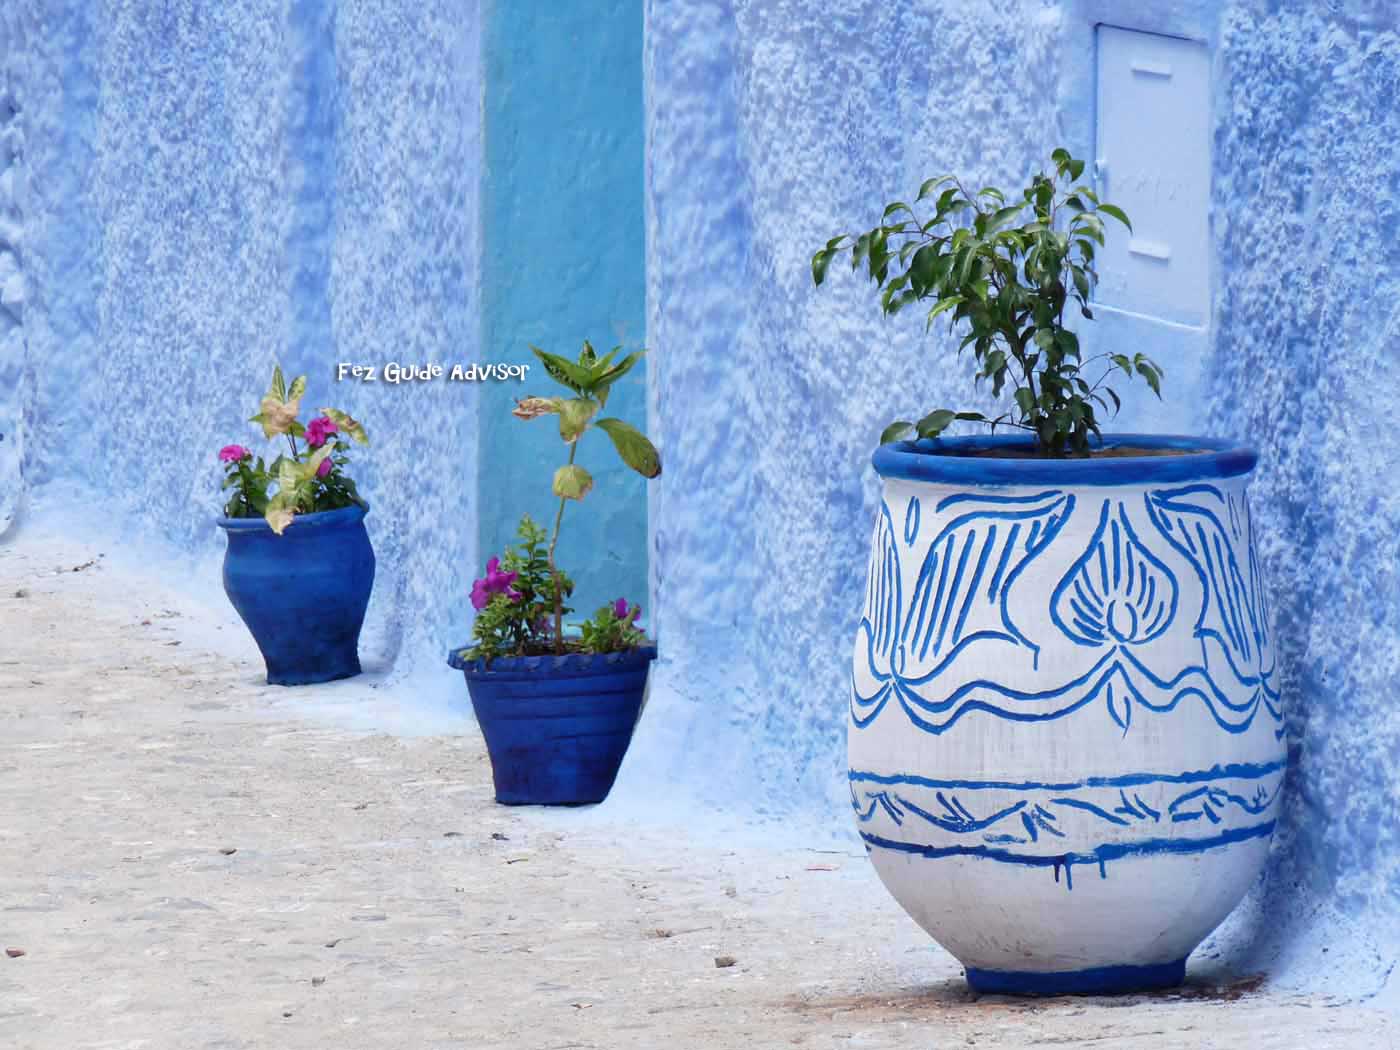 day trip from fes to chefchaouen